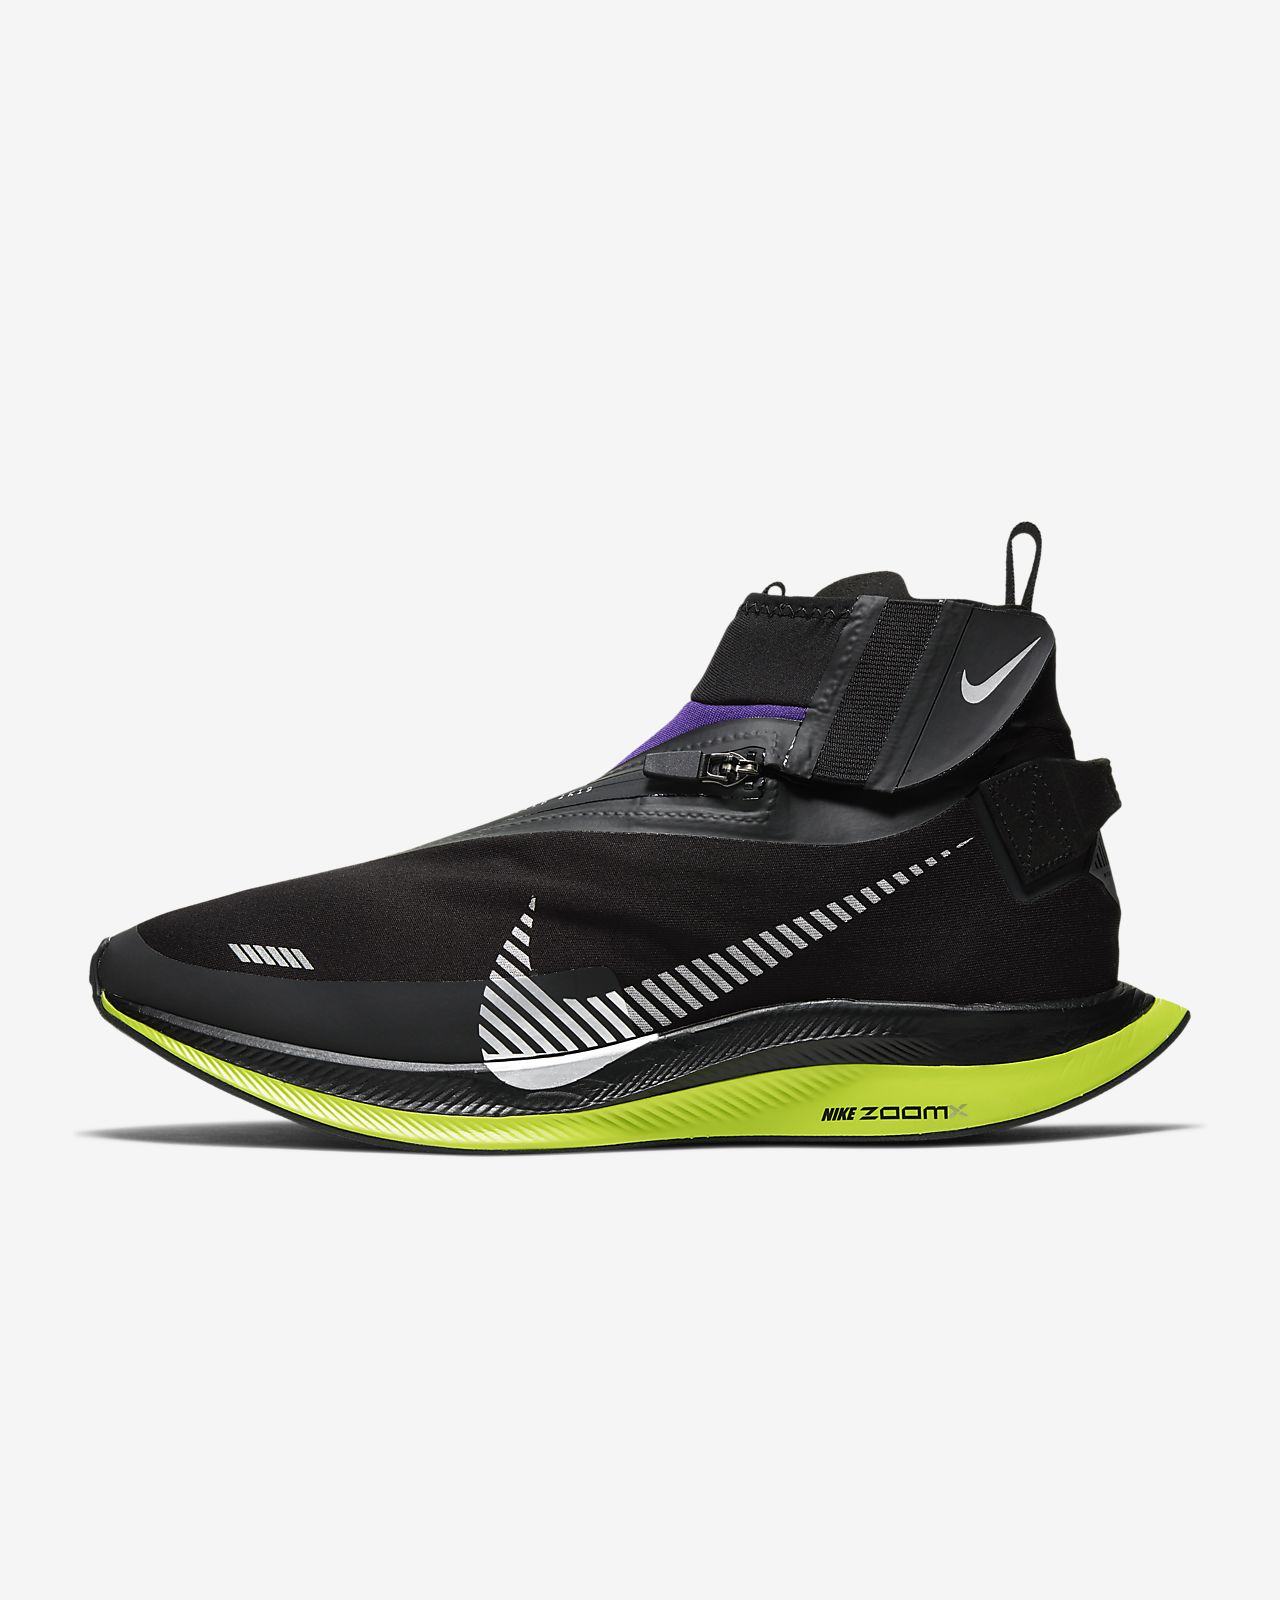 Nike.com Top Sellers, UP TO 59% OFF | www.encuentroguionistas.com